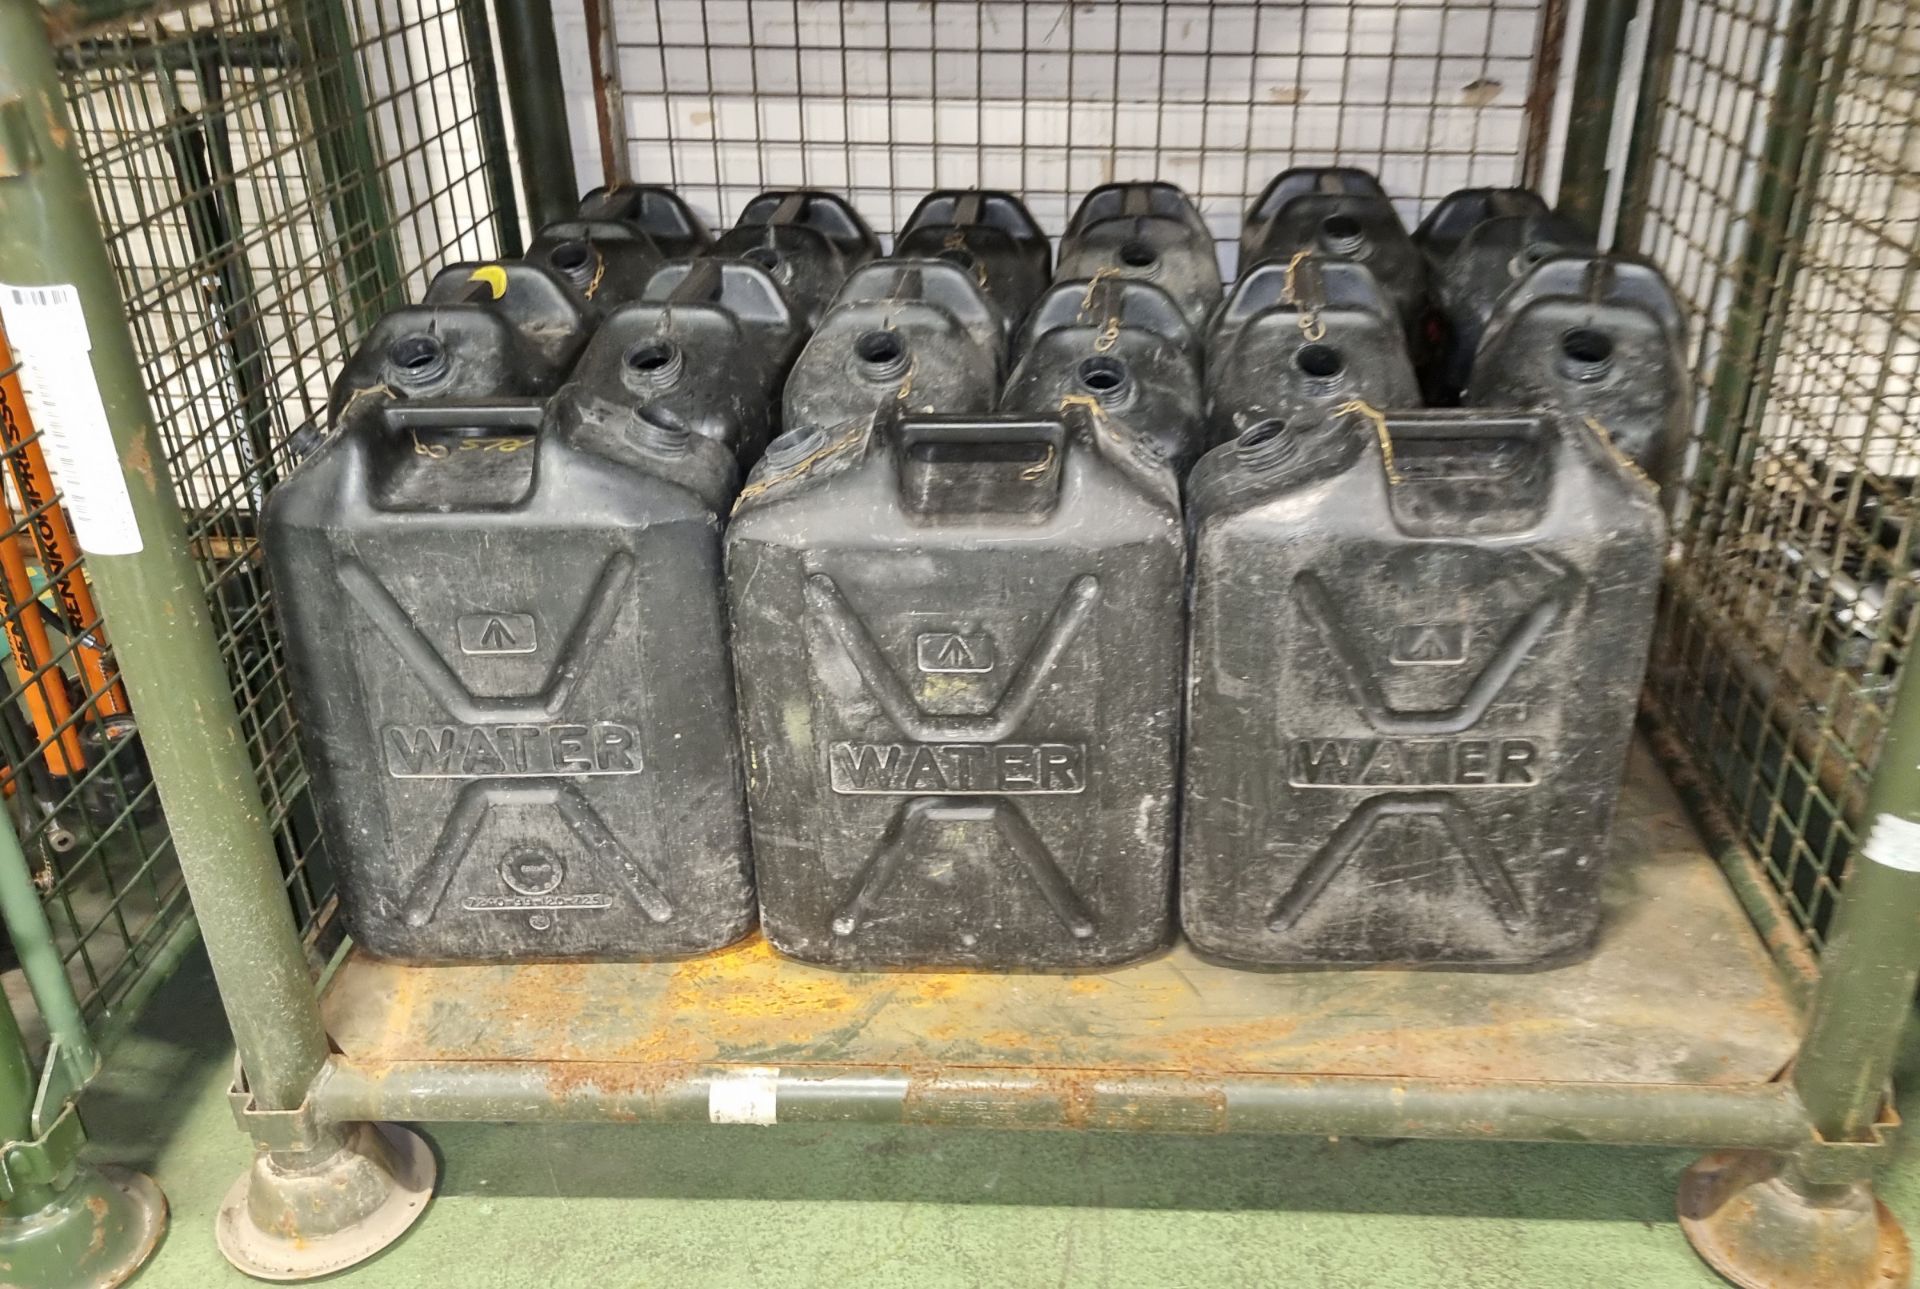 15x 20 litre plastic water containers - NO CAPS